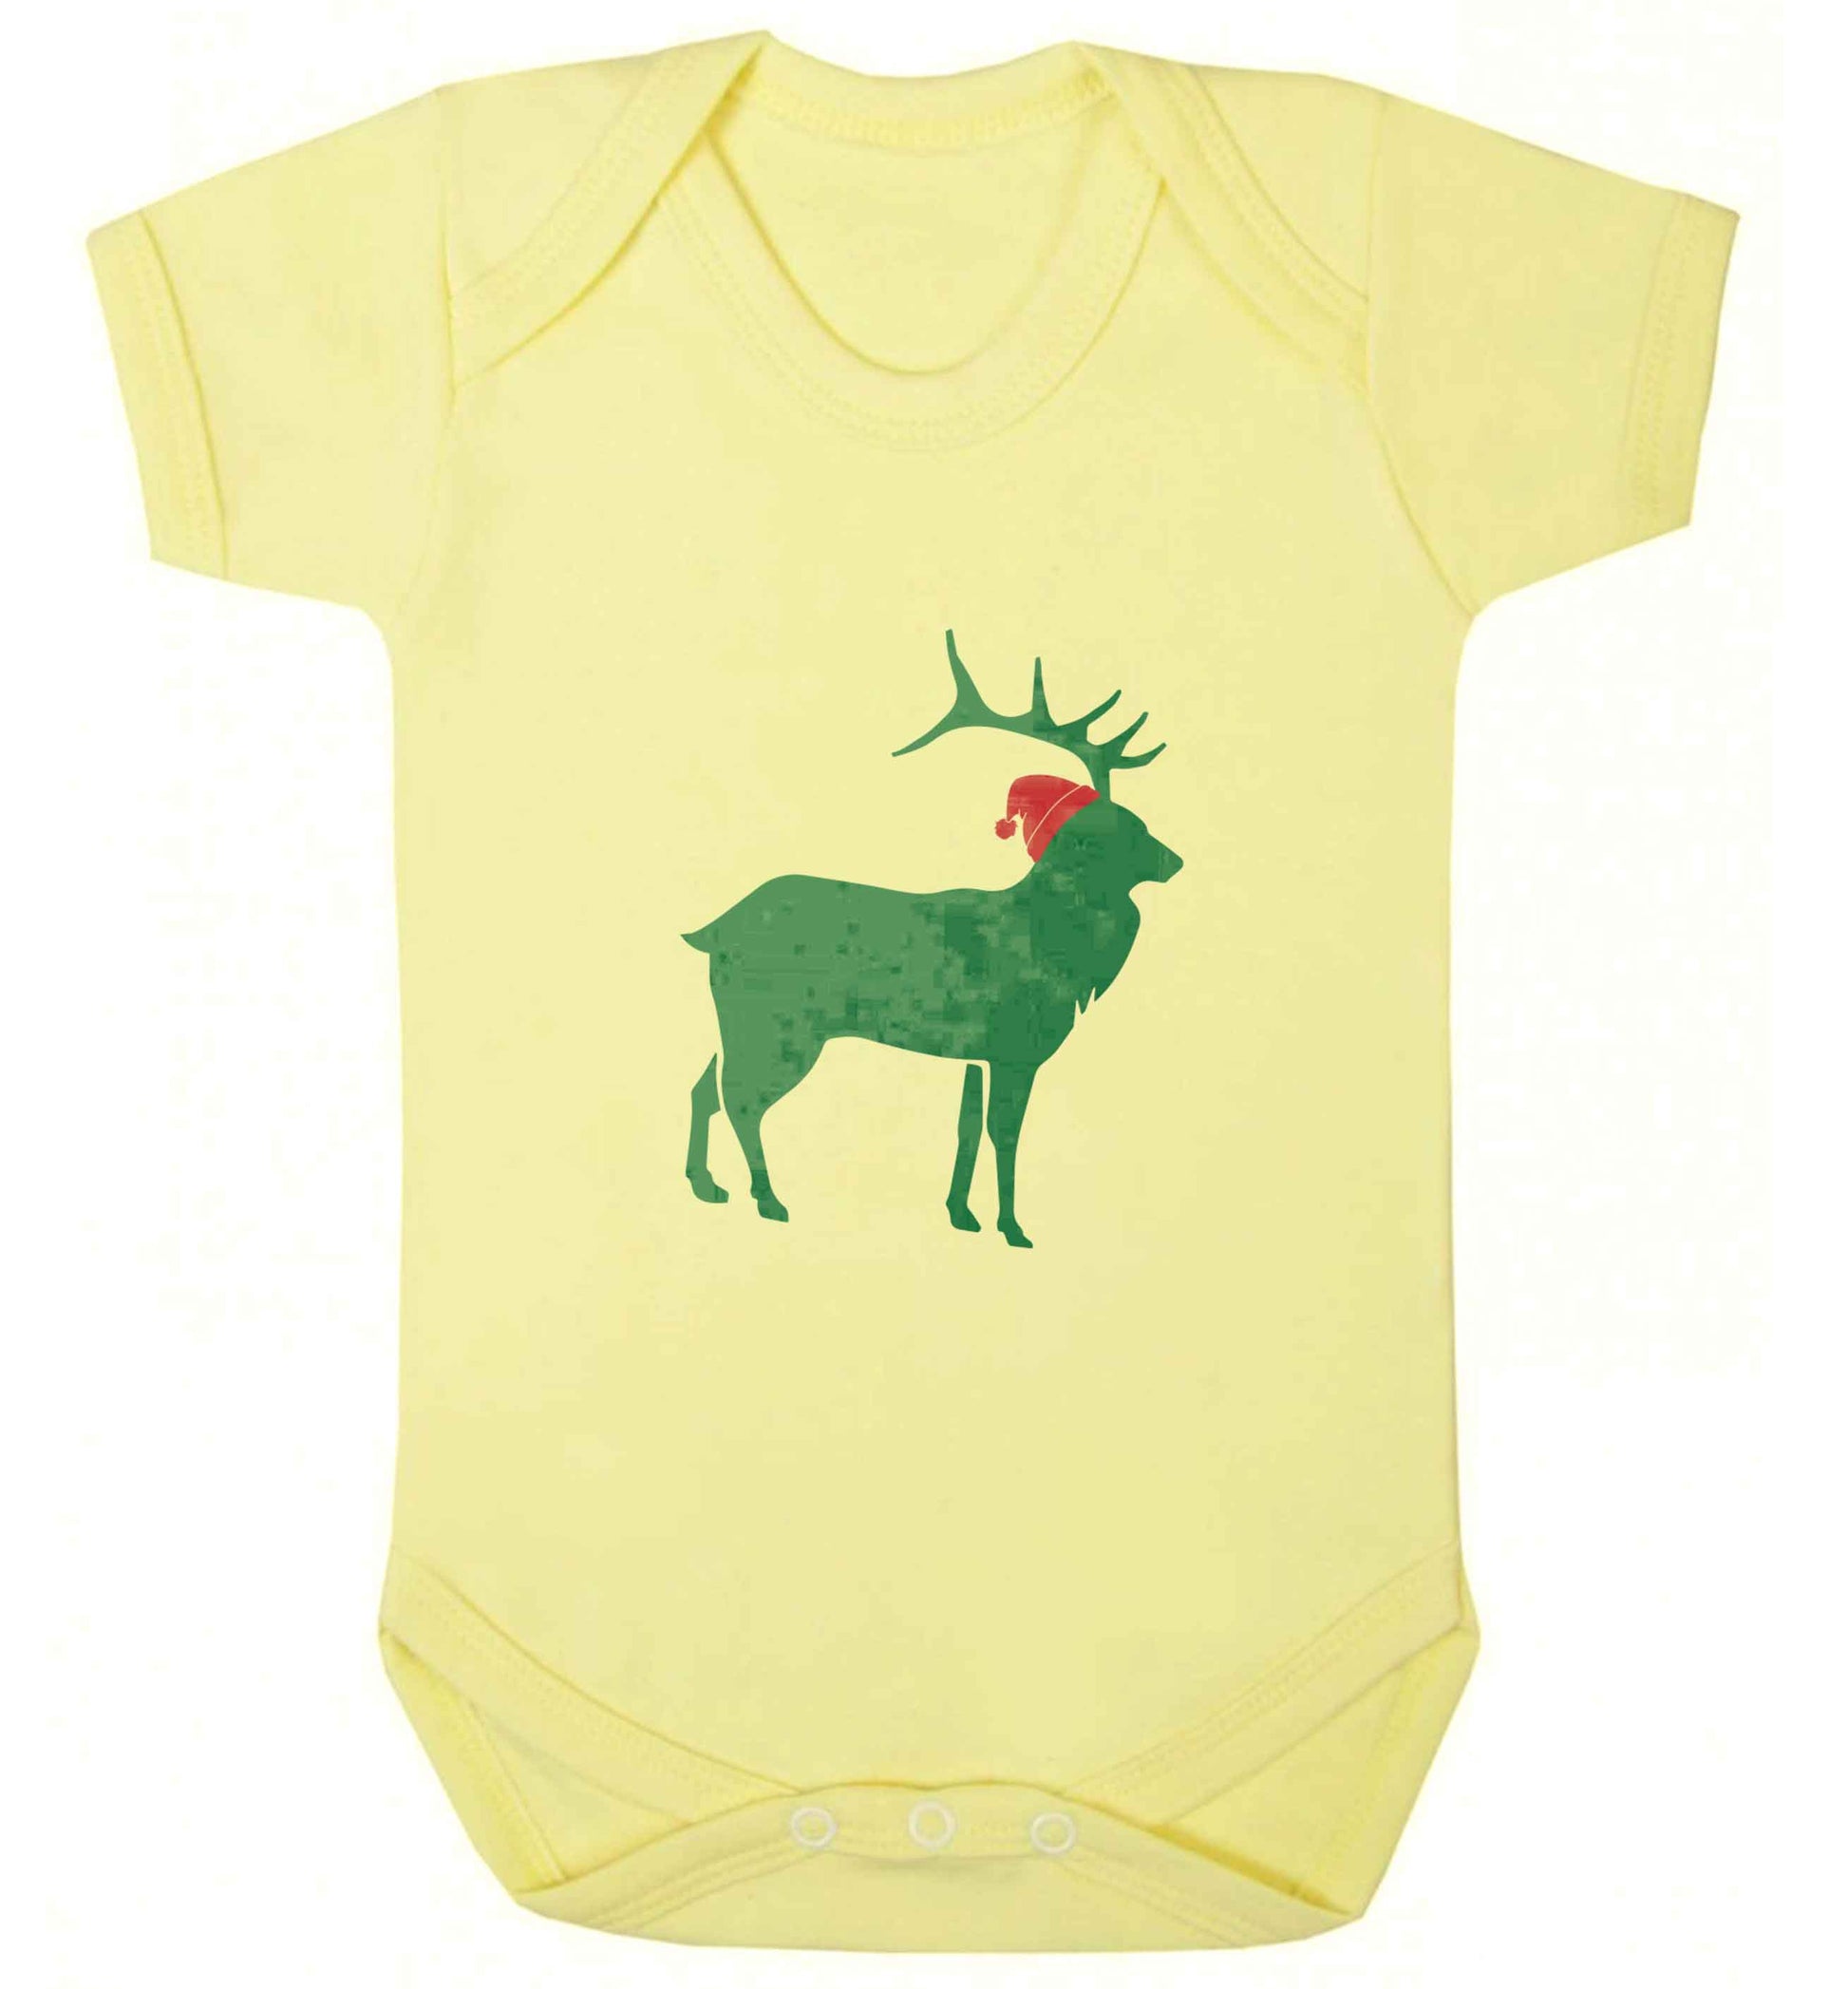 Green stag Santa baby vest pale yellow 18-24 months